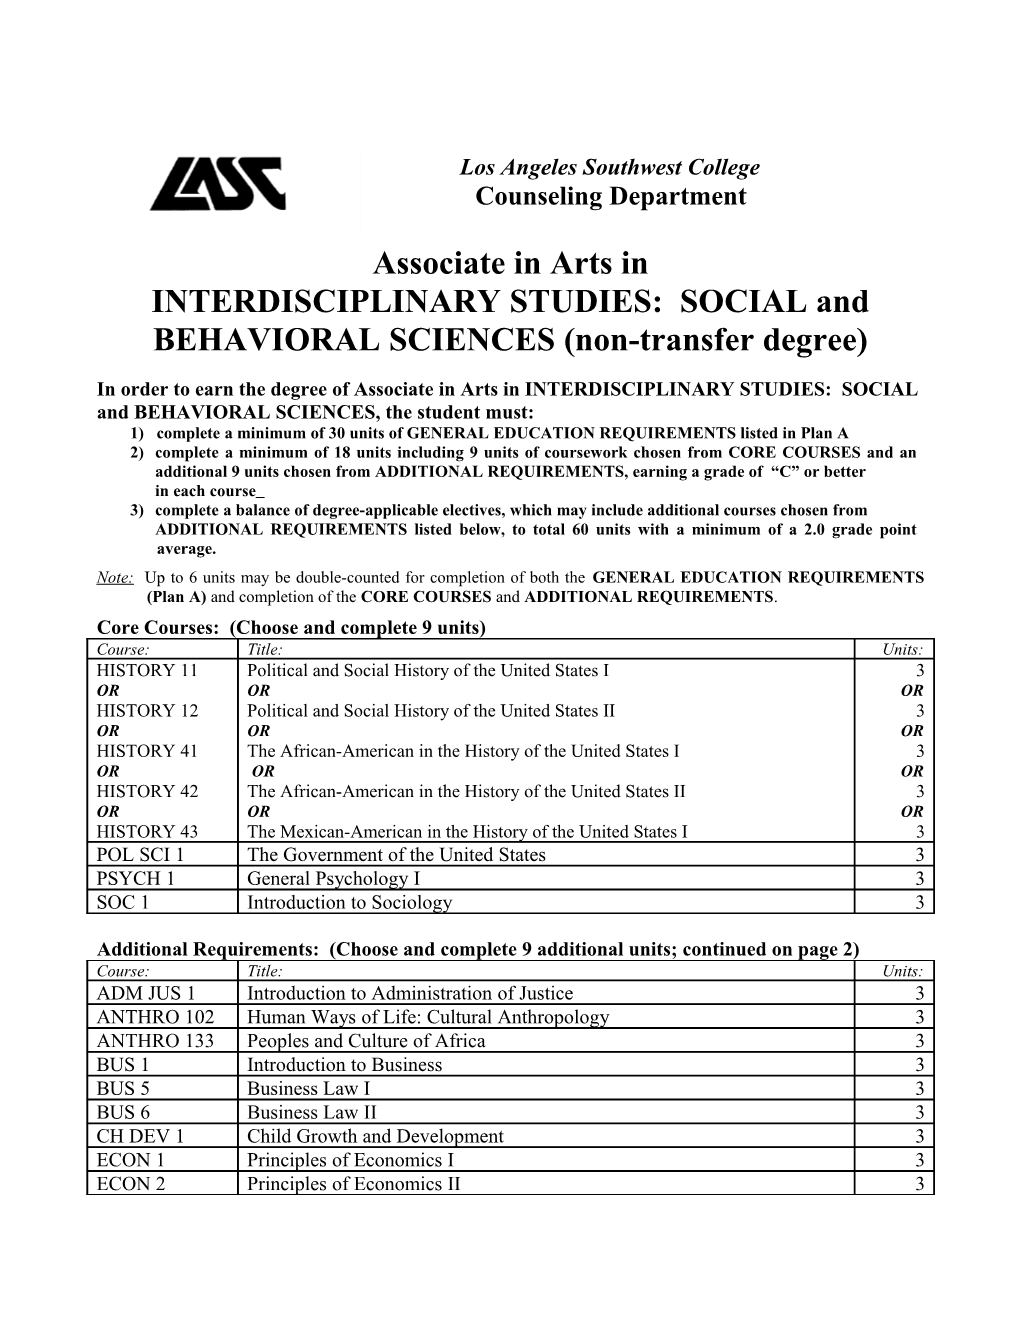 INTERDISCIPLINARY STUDIES: SOCIAL and BEHAVIORAL SCIENCES (Non-Transfer Degree) Page 1 of 2